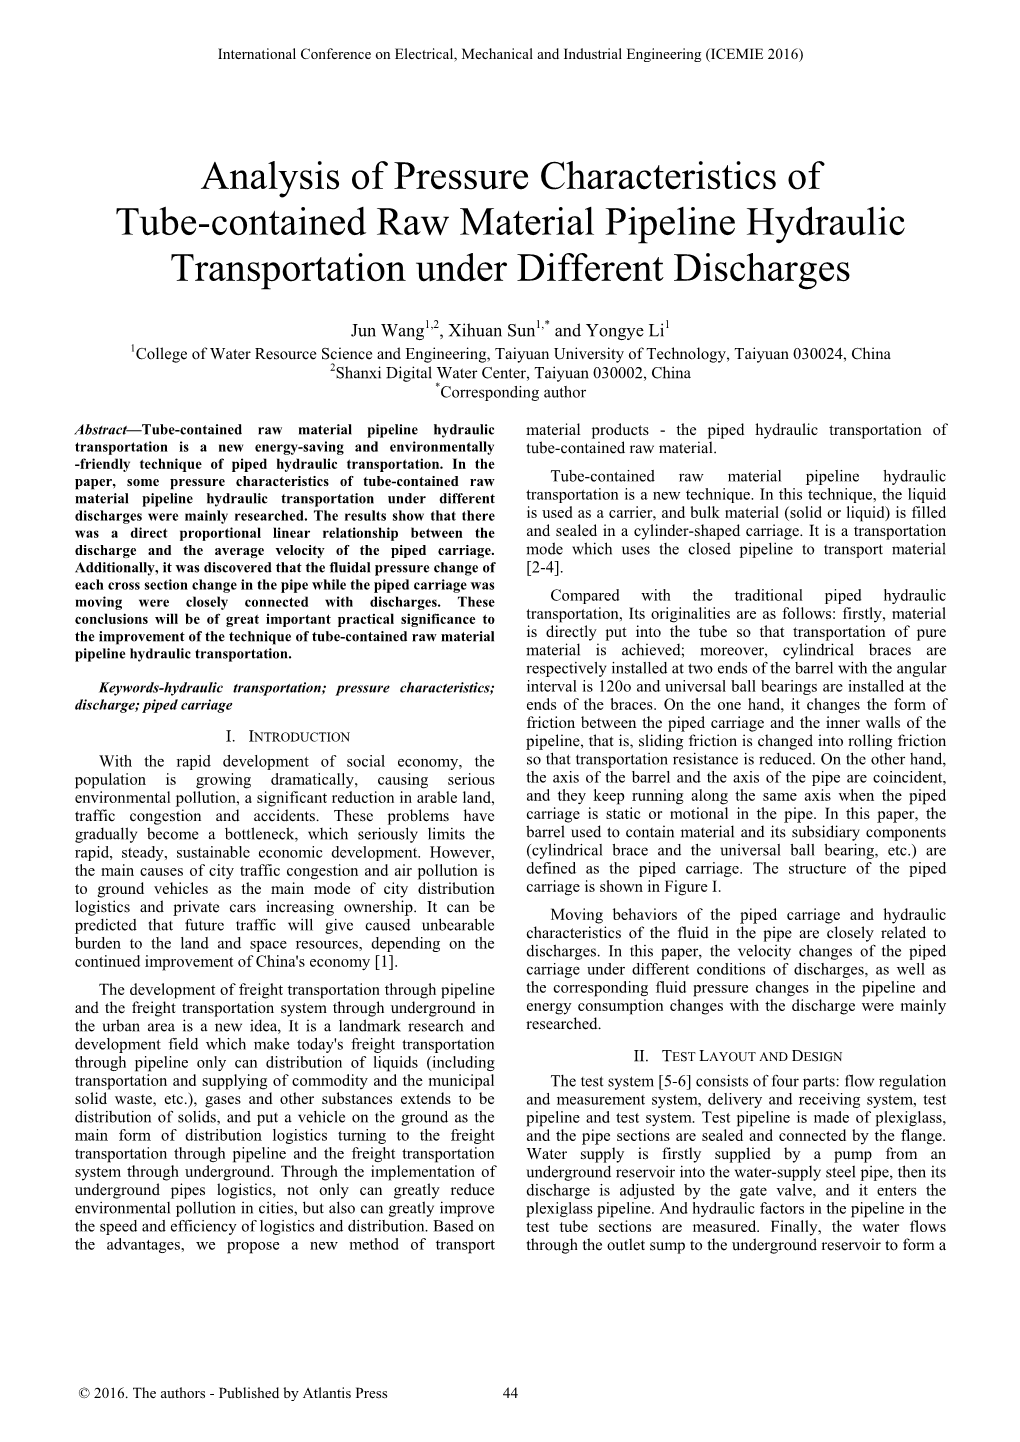 Analysis of Pressure Characteristics of Tube-Contained Raw Material Pipeline Hydraulic Transportation Under Different Discharges